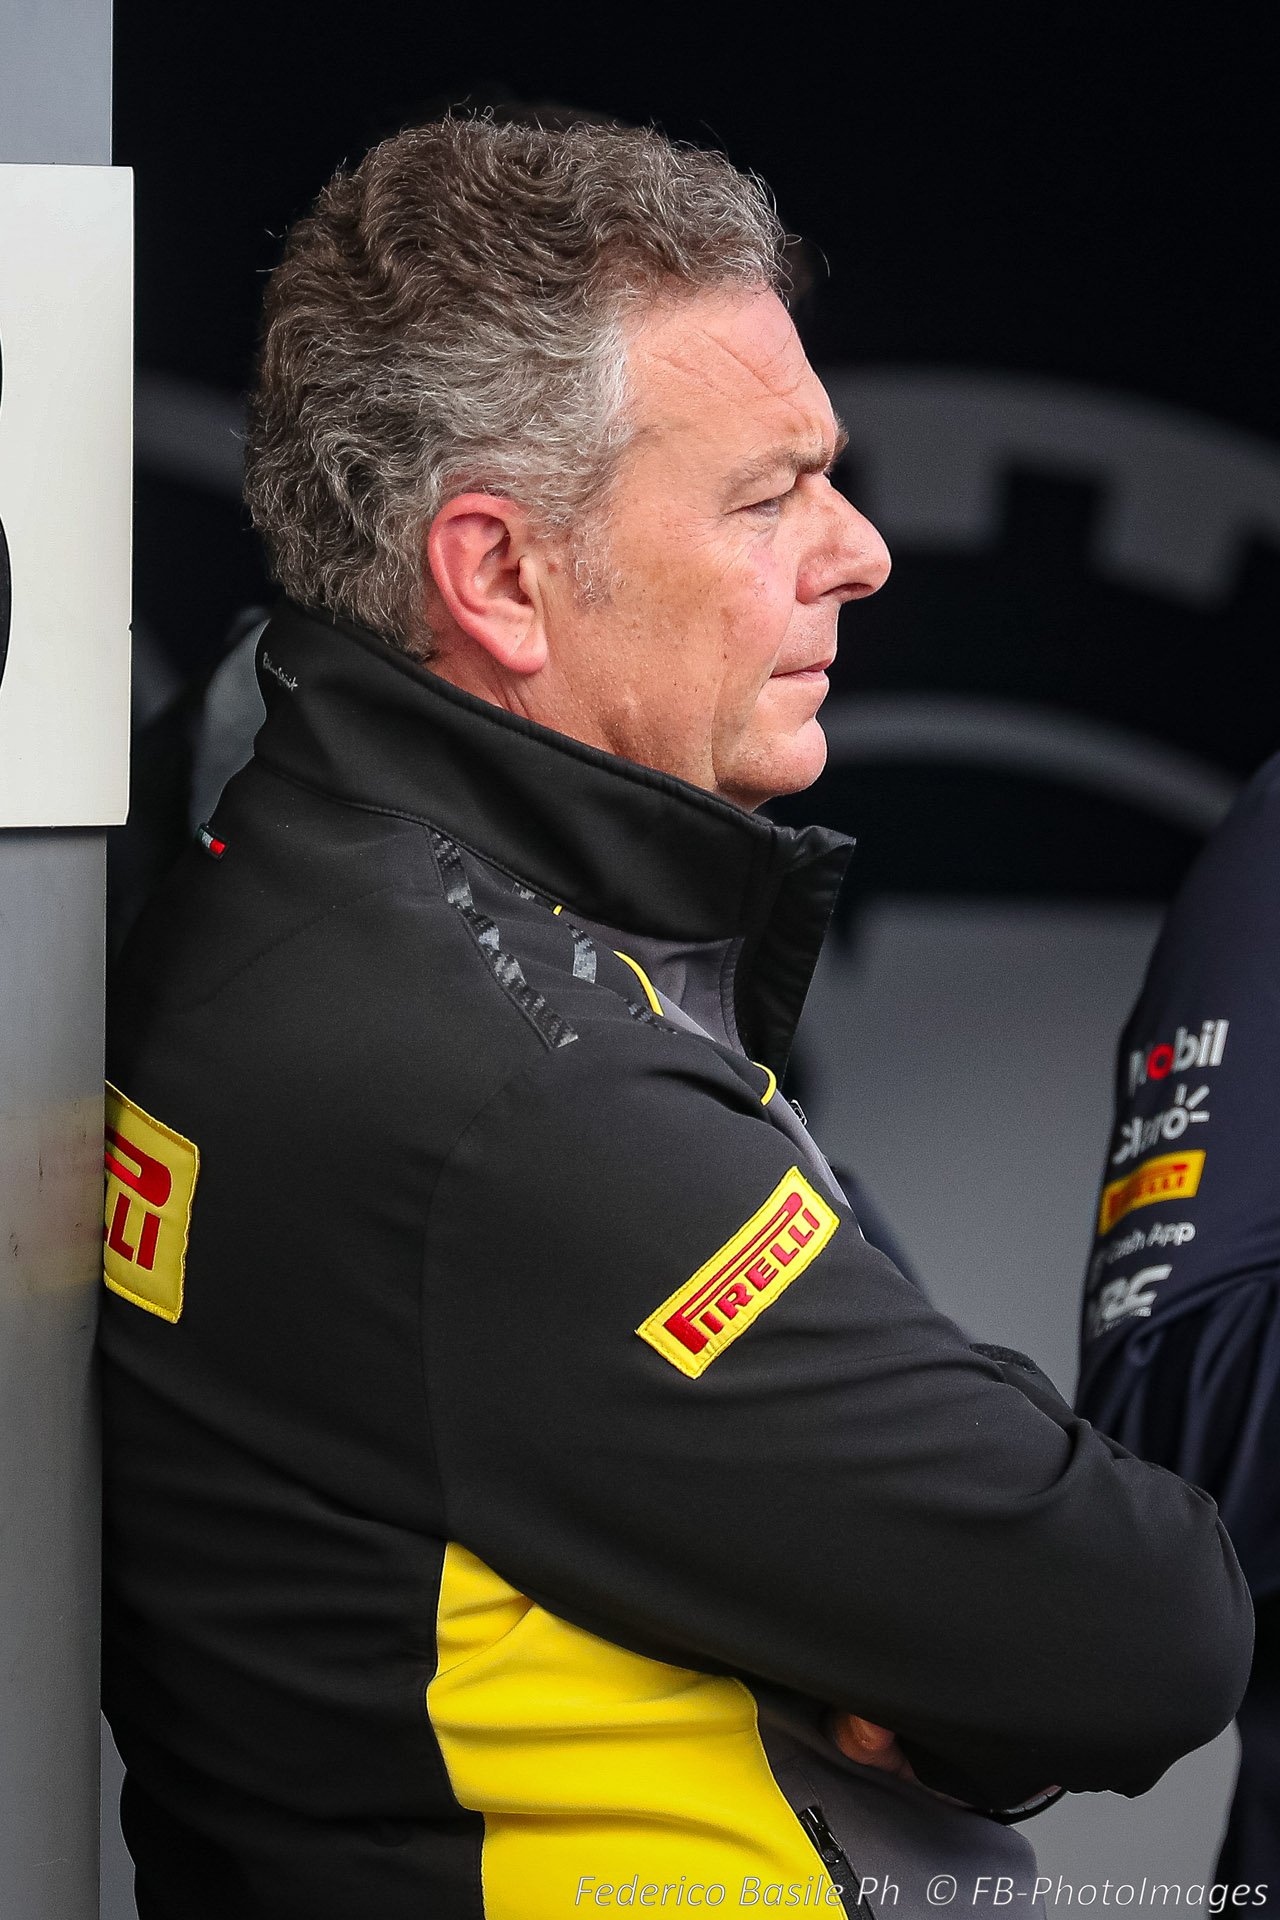 Mario Isola, Pirelli technical director during the Belgian GP, Spa-Francorchamps 27-30 July 2023 Formula 1 World championship 2023.